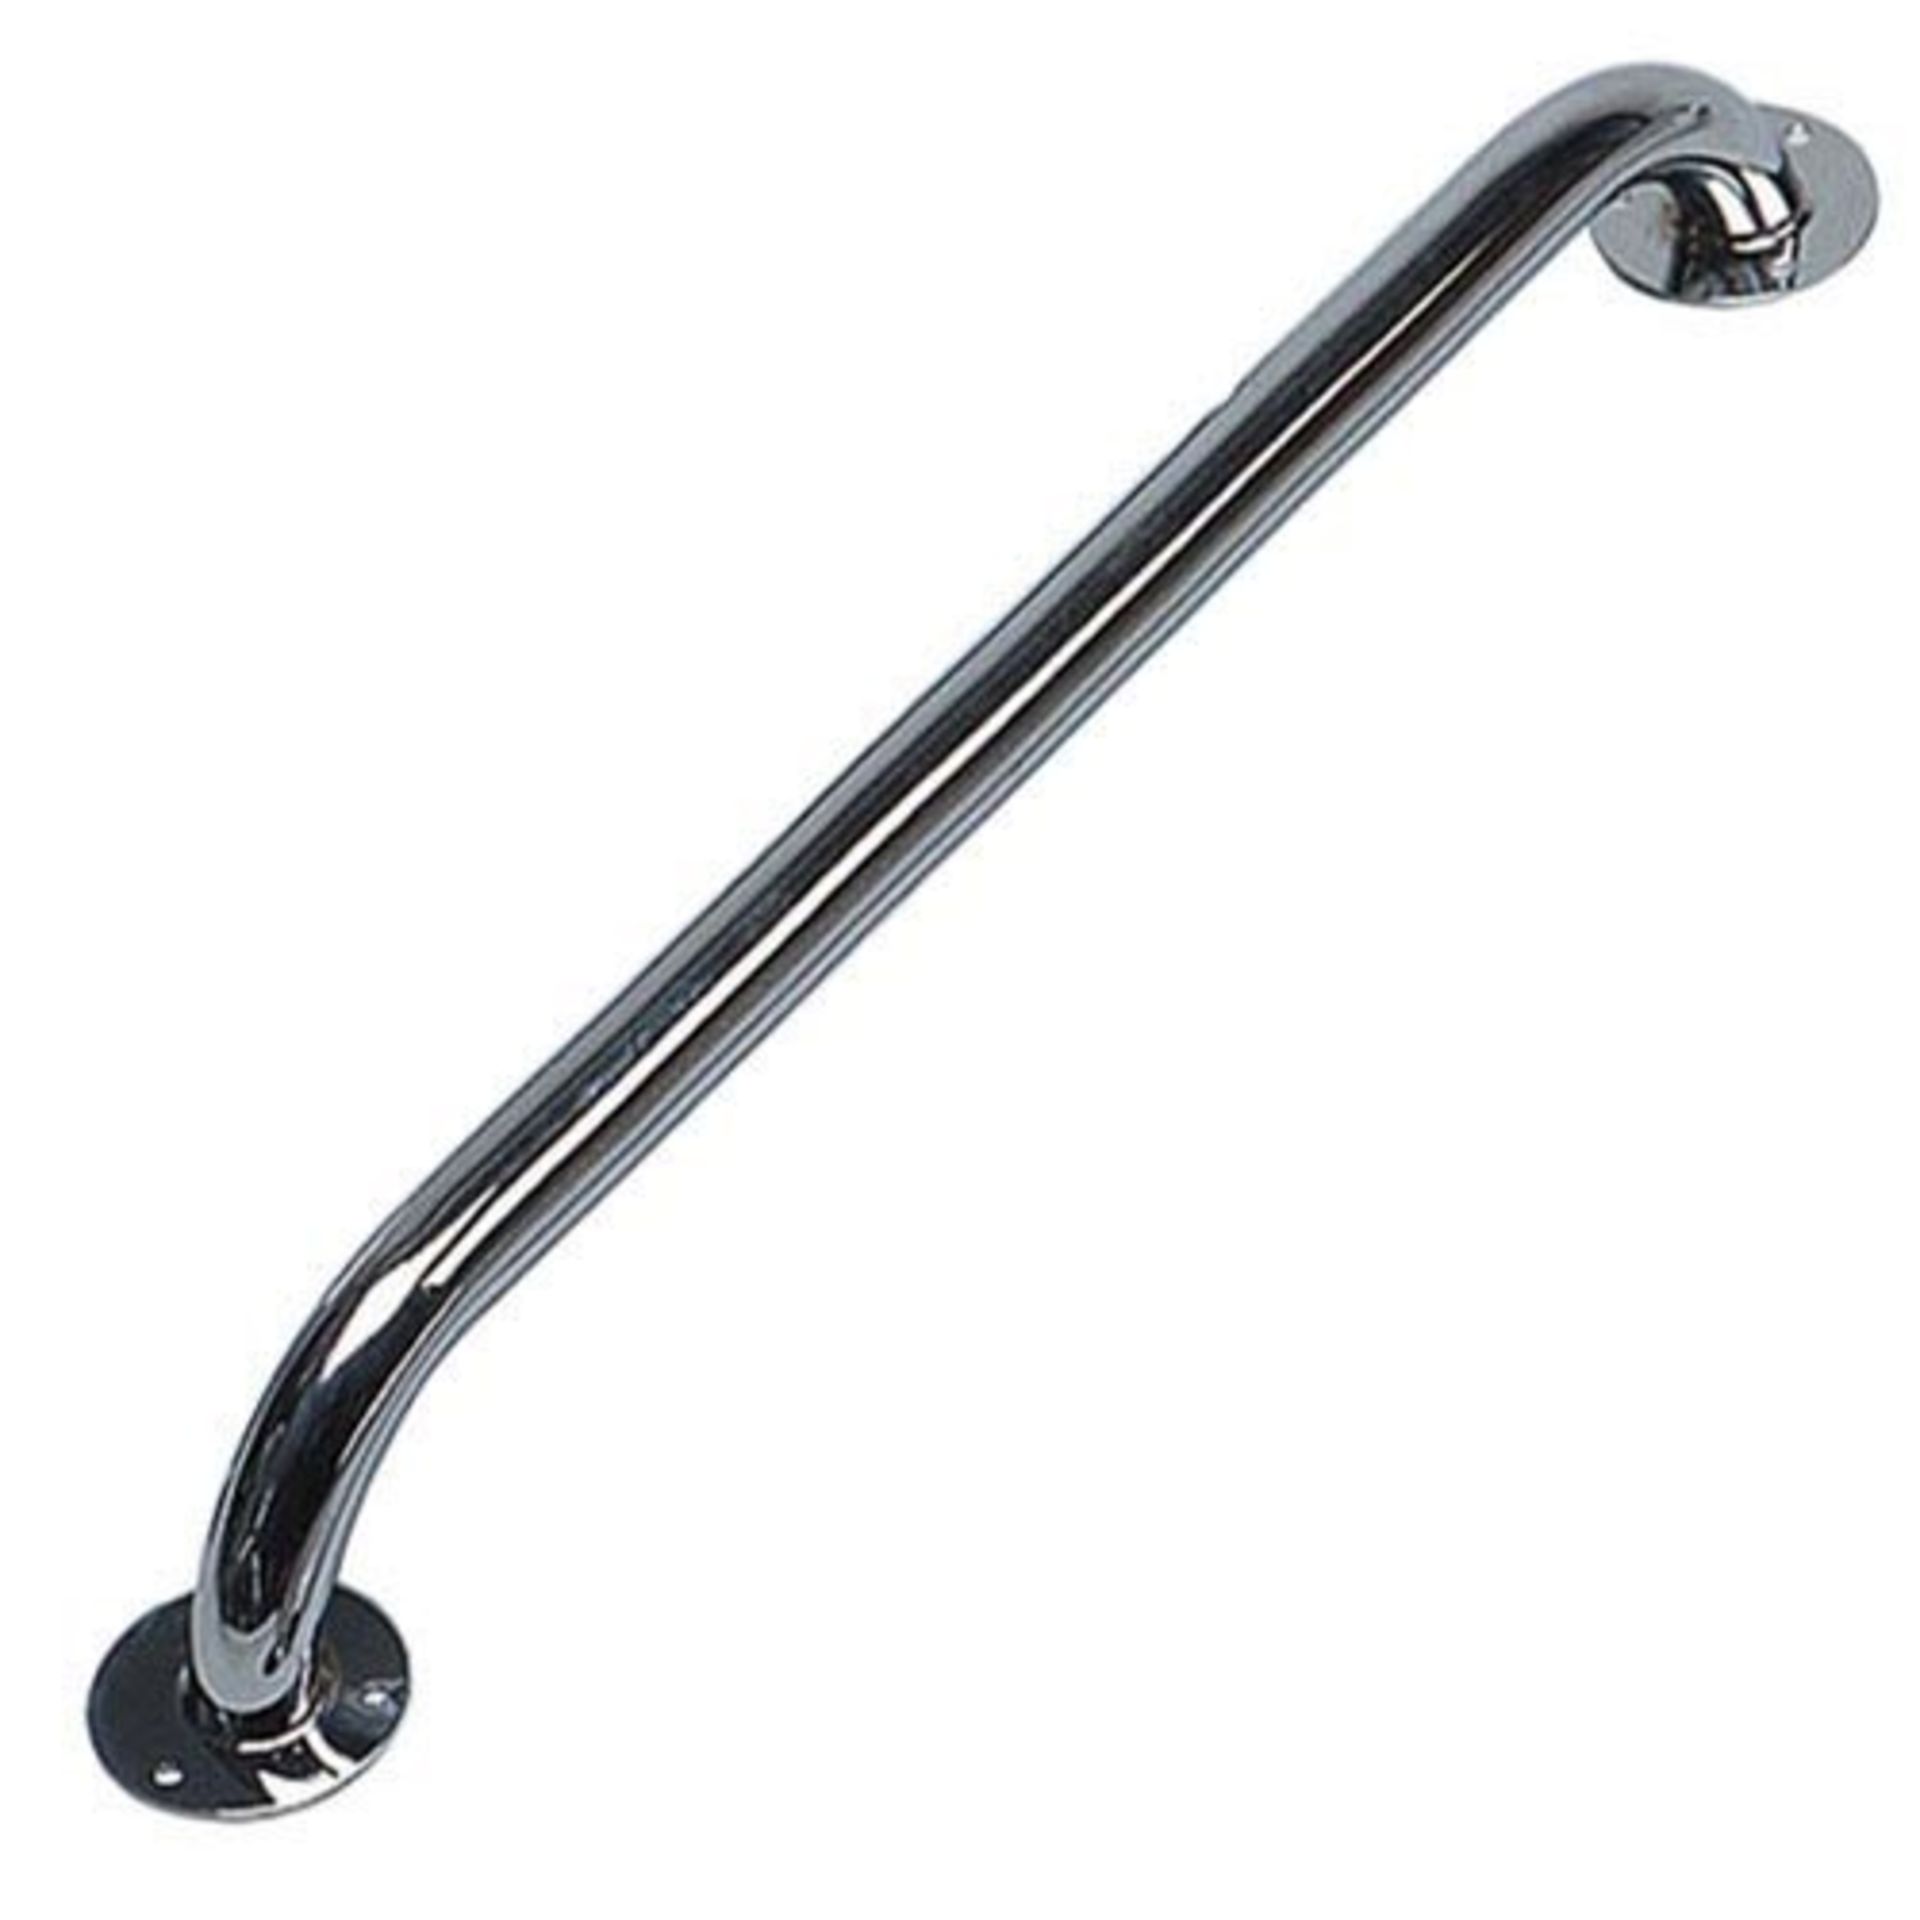 ME : 1 AS NEW BAGGED 24 INCH STAINLESS STEEL GRAB RAIL WITH CONCEALED FITTINGS / RRP £29.95 (VIEWING